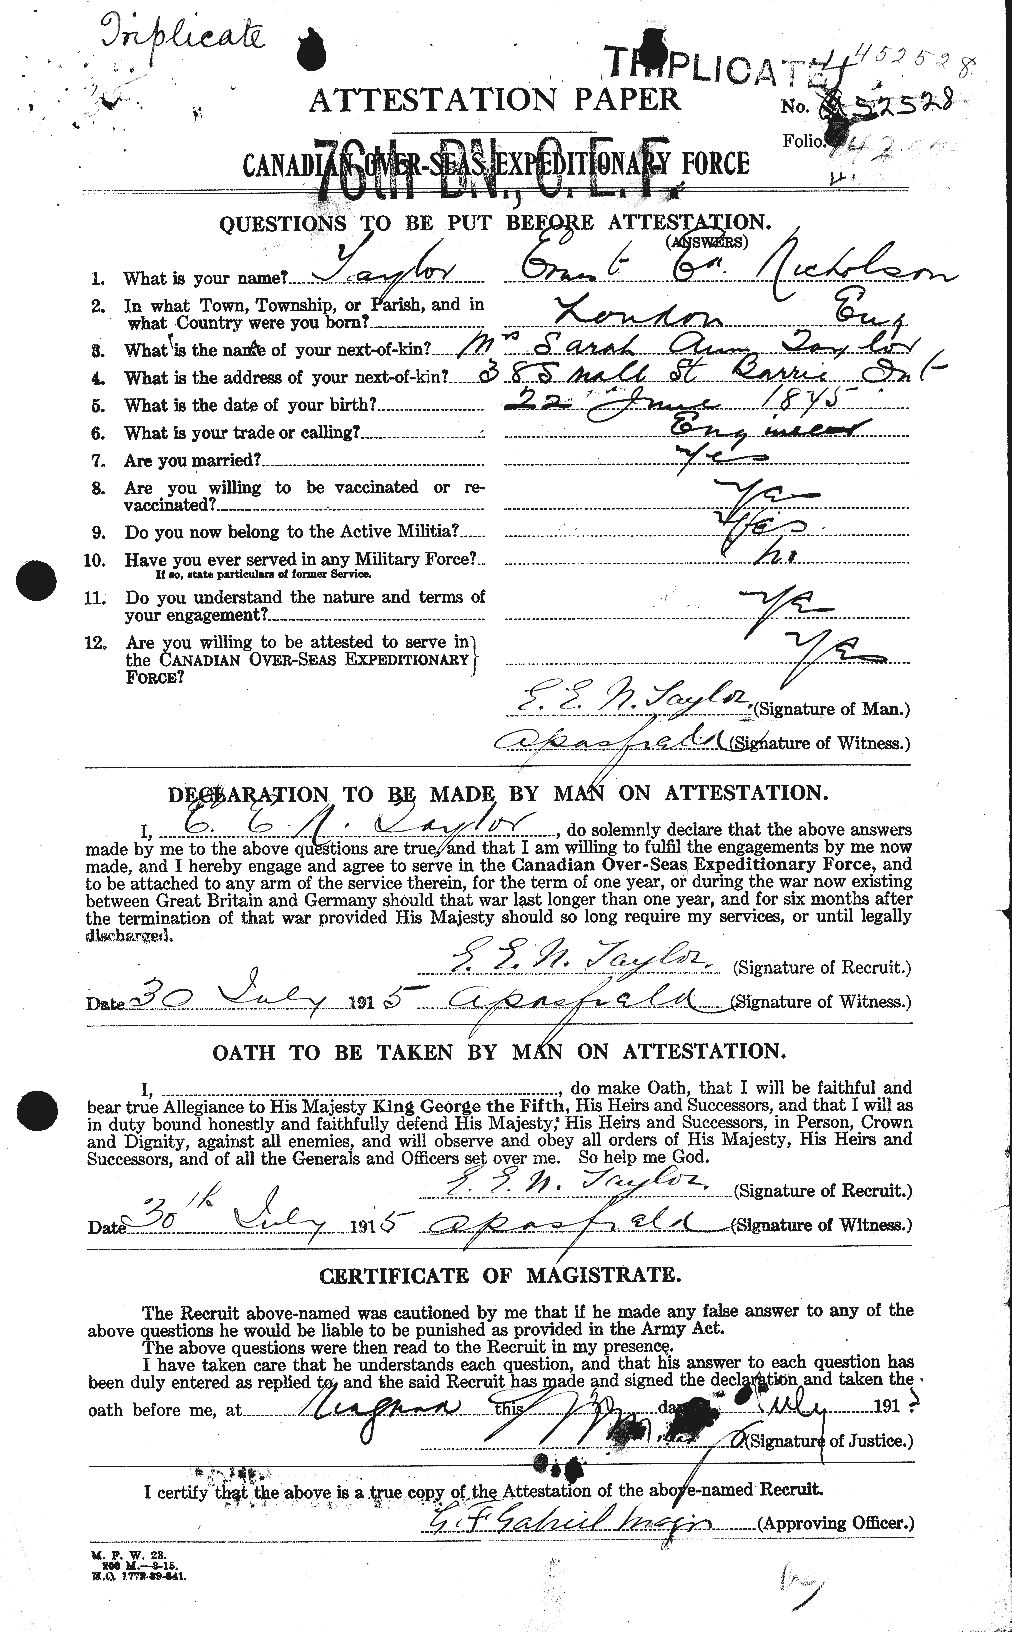 Personnel Records of the First World War - CEF 627391a